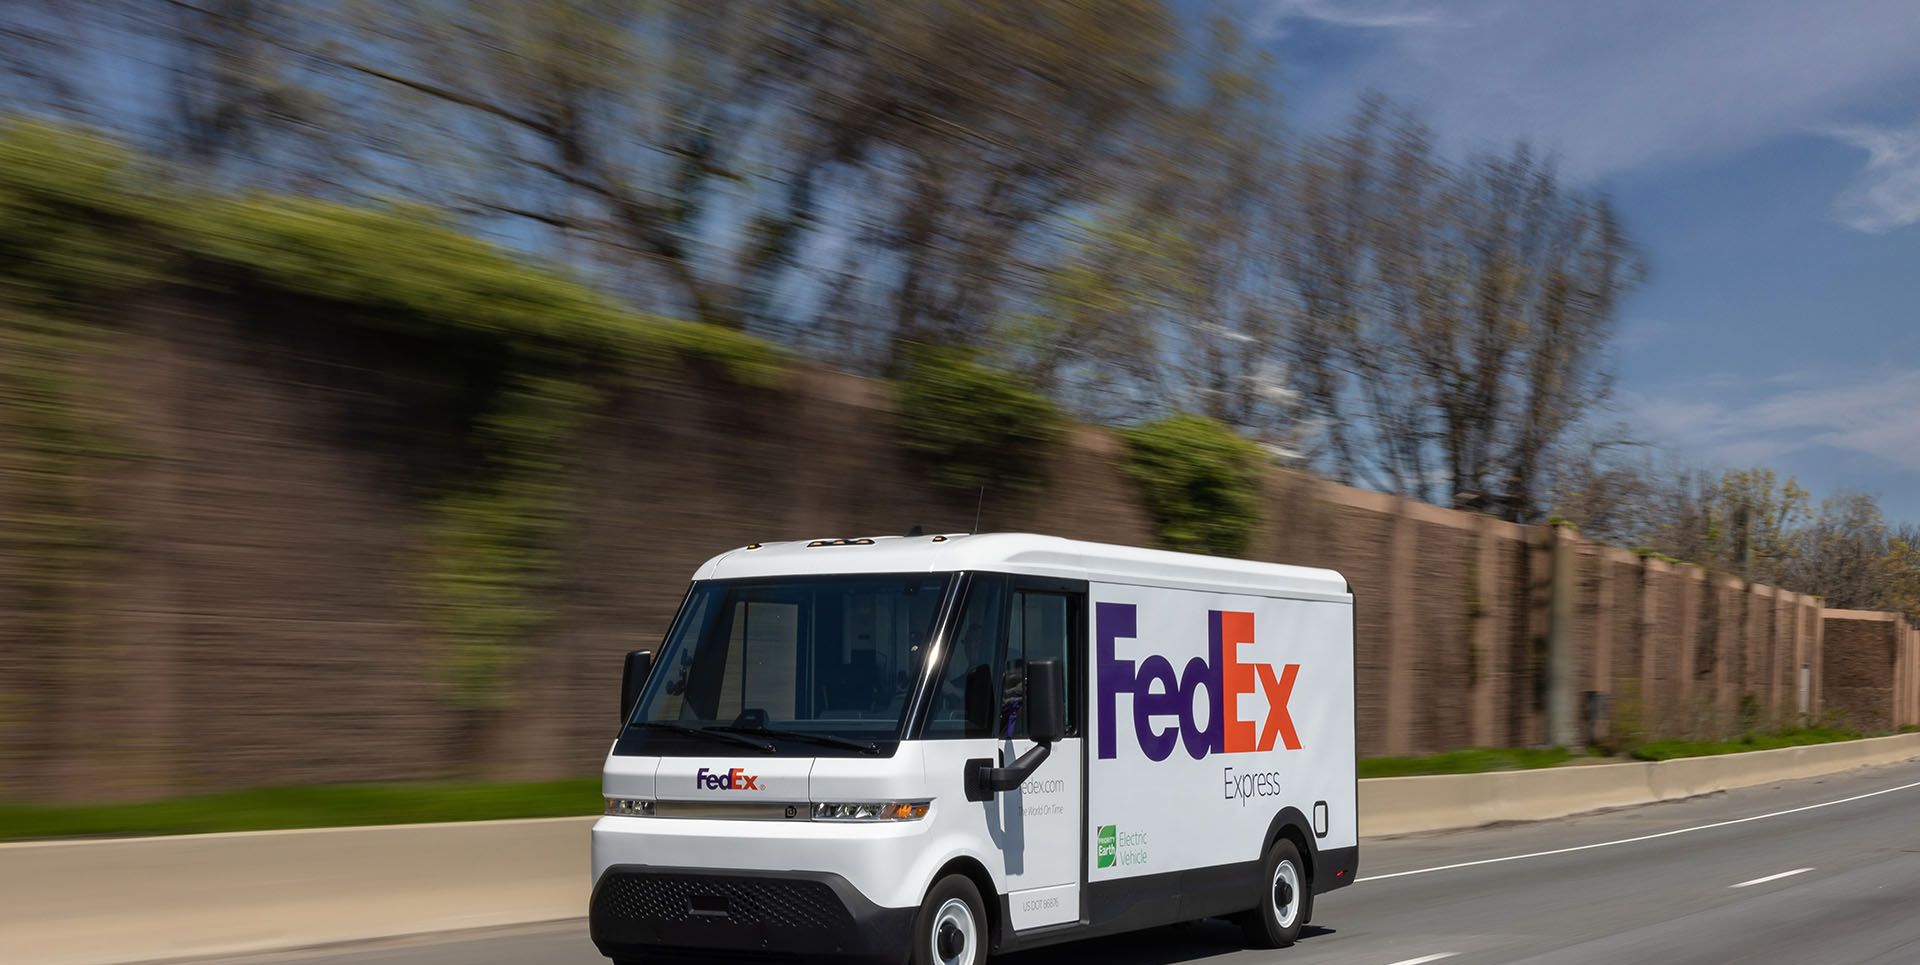 BrightDrop Delivers the First 150 EV Vans to FedEx